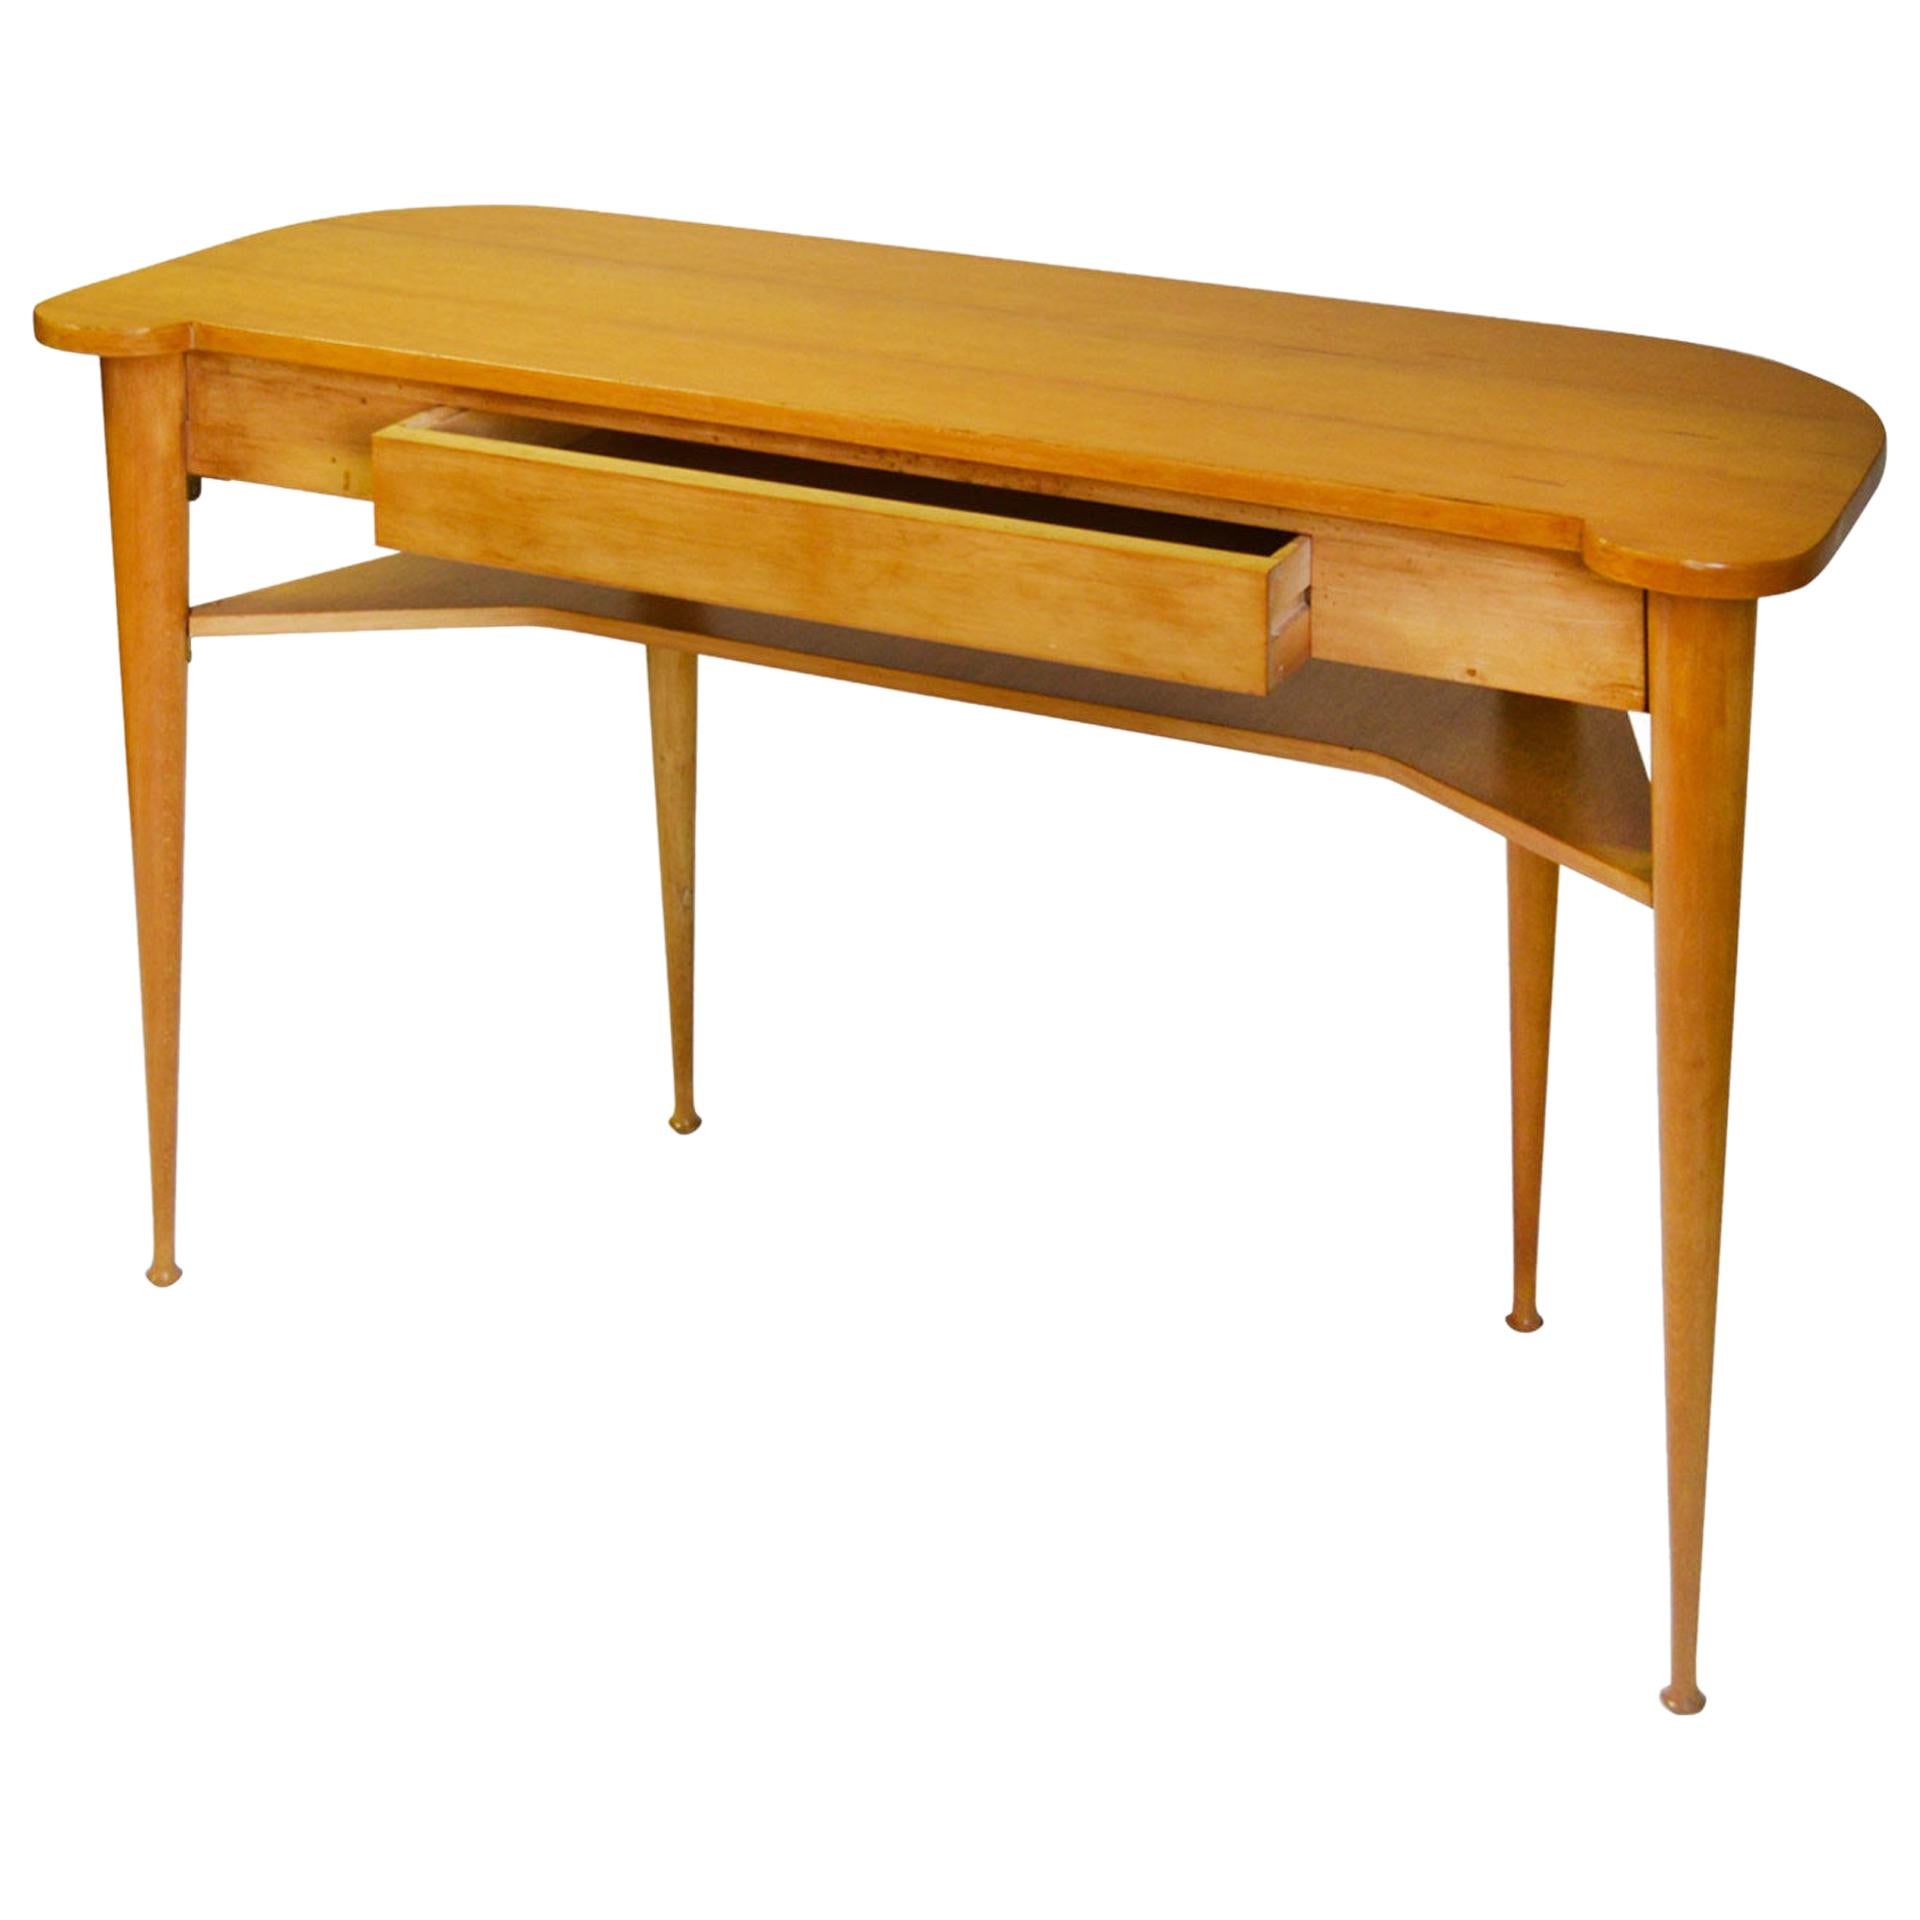 20th Century Italian Production Console Table in Wood with Drawer, 1950s